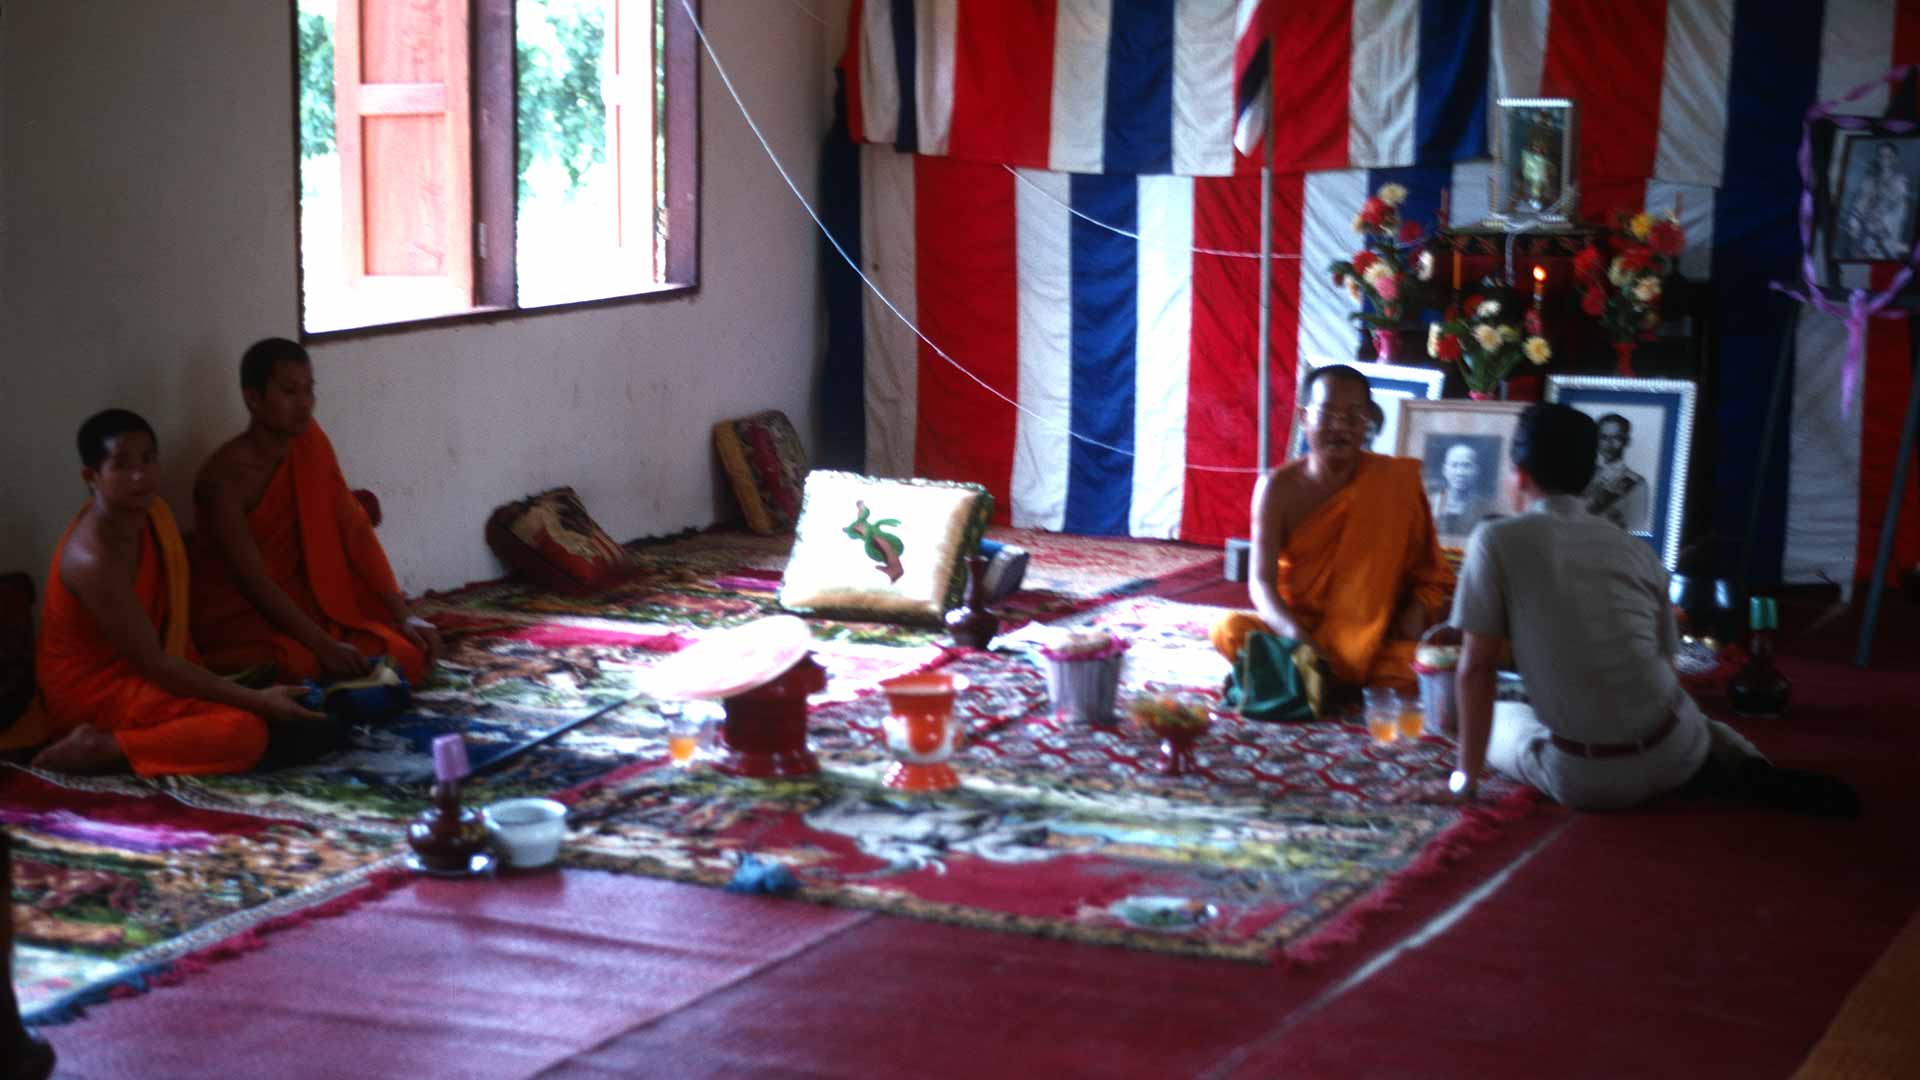 Monk receiving visitors in visiting area sitting on floor with thai flags cover back wall